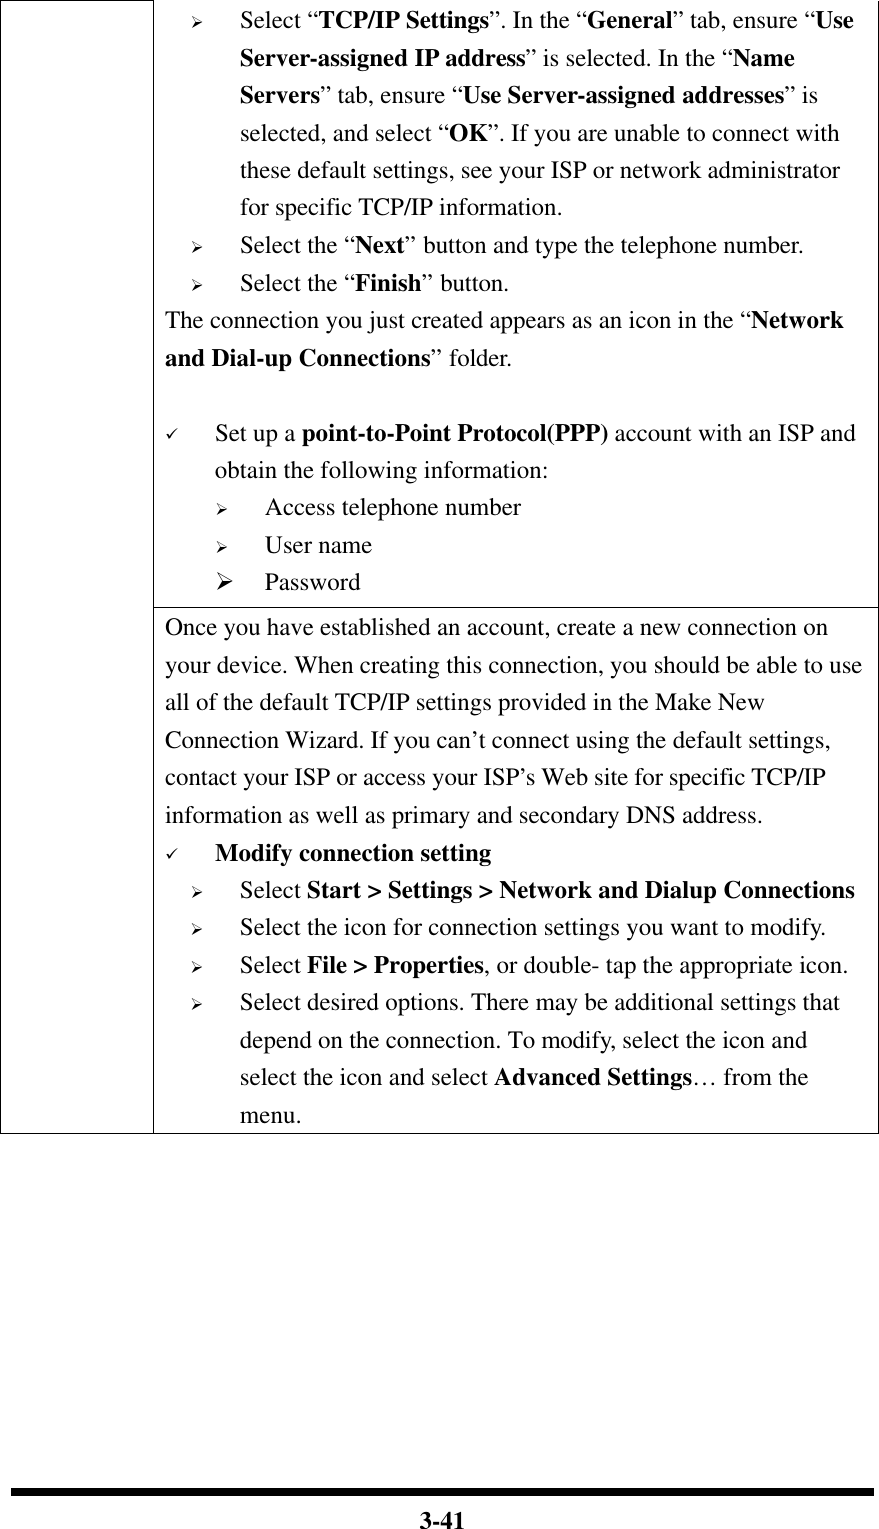  3-41 Ø Select “TCP/IP Settings”. In the “General” tab, ensure “Use Server-assigned IP address” is selected. In the “Name Servers” tab, ensure “Use Server-assigned addresses” is selected, and select “OK”. If you are unable to connect with these default settings, see your ISP or network administrator for specific TCP/IP information. Ø Select the “Next” button and type the telephone number. Ø Select the “Finish” button. The connection you just created appears as an icon in the “Network and Dial-up Connections” folder.    ü Set up a point-to-Point Protocol(PPP) account with an ISP and obtain the following information: Ø Access telephone number Ø User name Ø Password  Once you have established an account, create a new connection on your device. When creating this connection, you should be able to use all of the default TCP/IP settings provided in the Make New Connection Wizard. If you can’t connect using the default settings, contact your ISP or access your ISP’s Web site for specific TCP/IP information as well as primary and secondary DNS address. ü Modify connection setting Ø Select Start &gt; Settings &gt; Network and Dialup Connections Ø Select the icon for connection settings you want to modify. Ø Select File &gt; Properties, or double- tap the appropriate icon. Ø Select desired options. There may be additional settings that depend on the connection. To modify, select the icon and select the icon and select Advanced Settings… from the menu.  